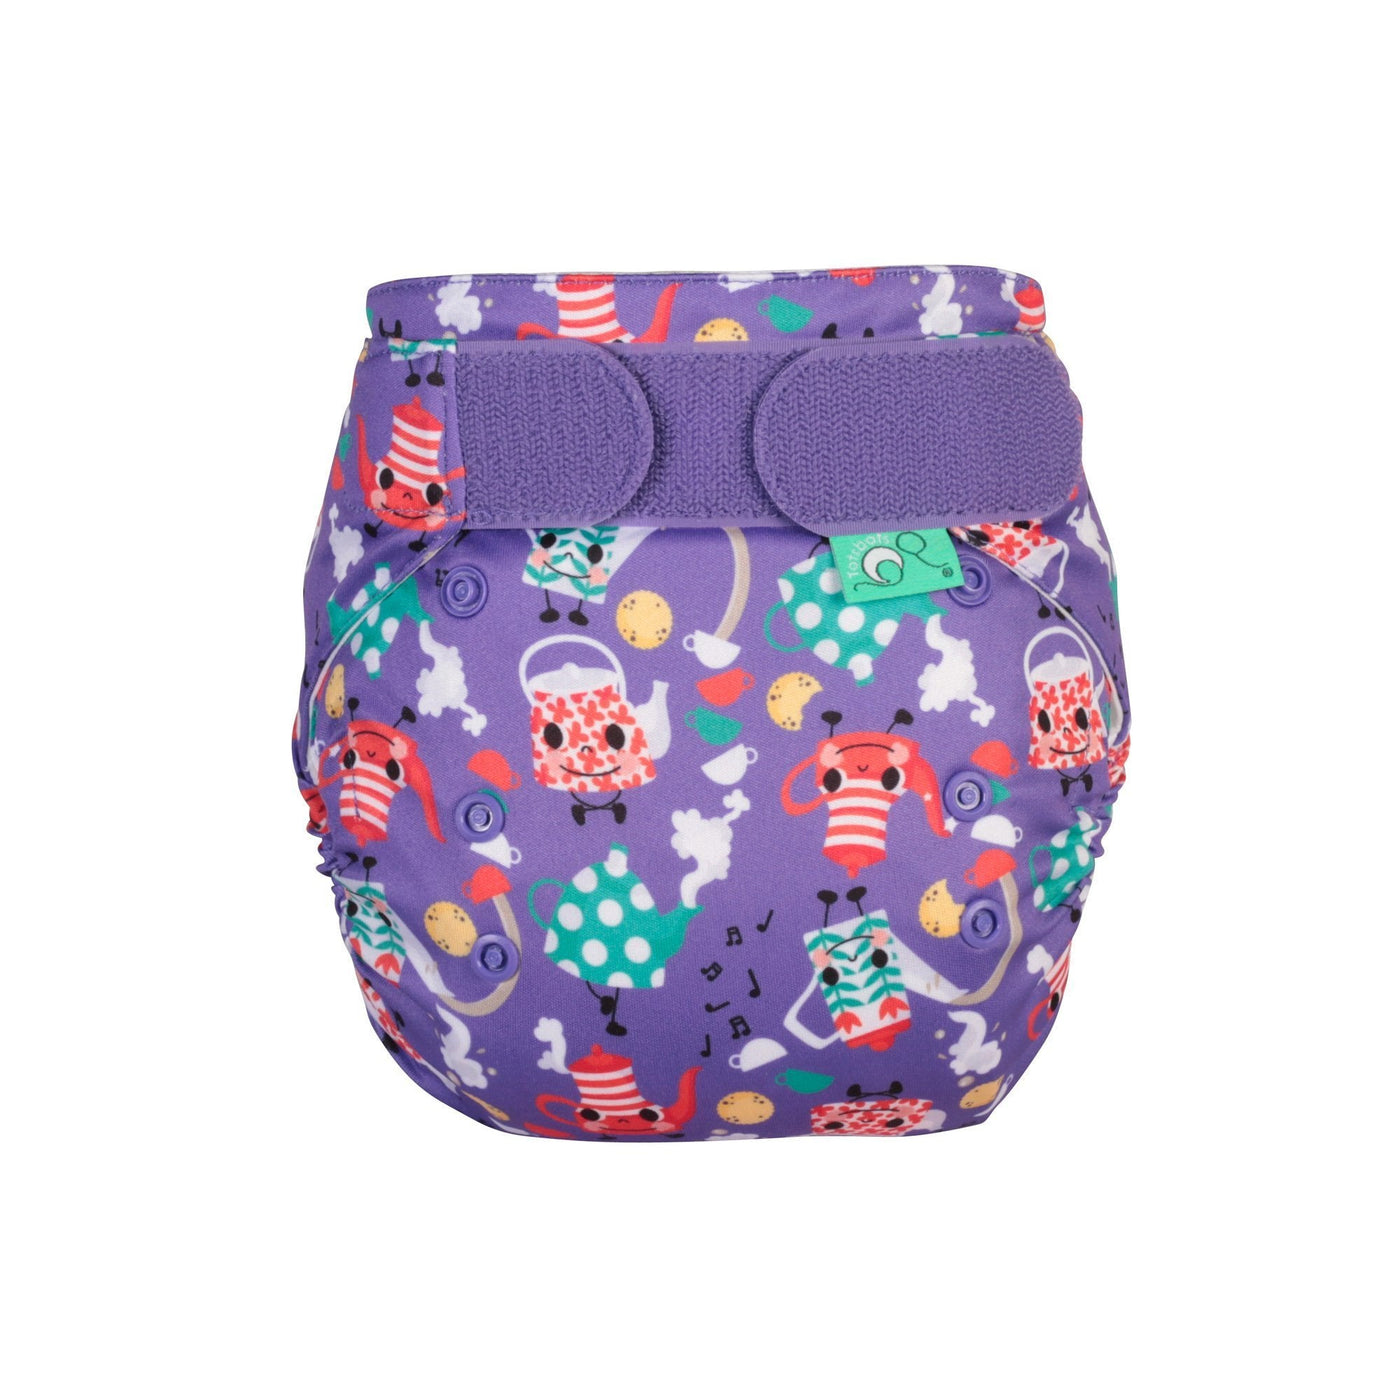 Tots BotsEasyFit Star Nappy All-in-oneColour: I'm a Little Teapotreusable nappiesEarthlets